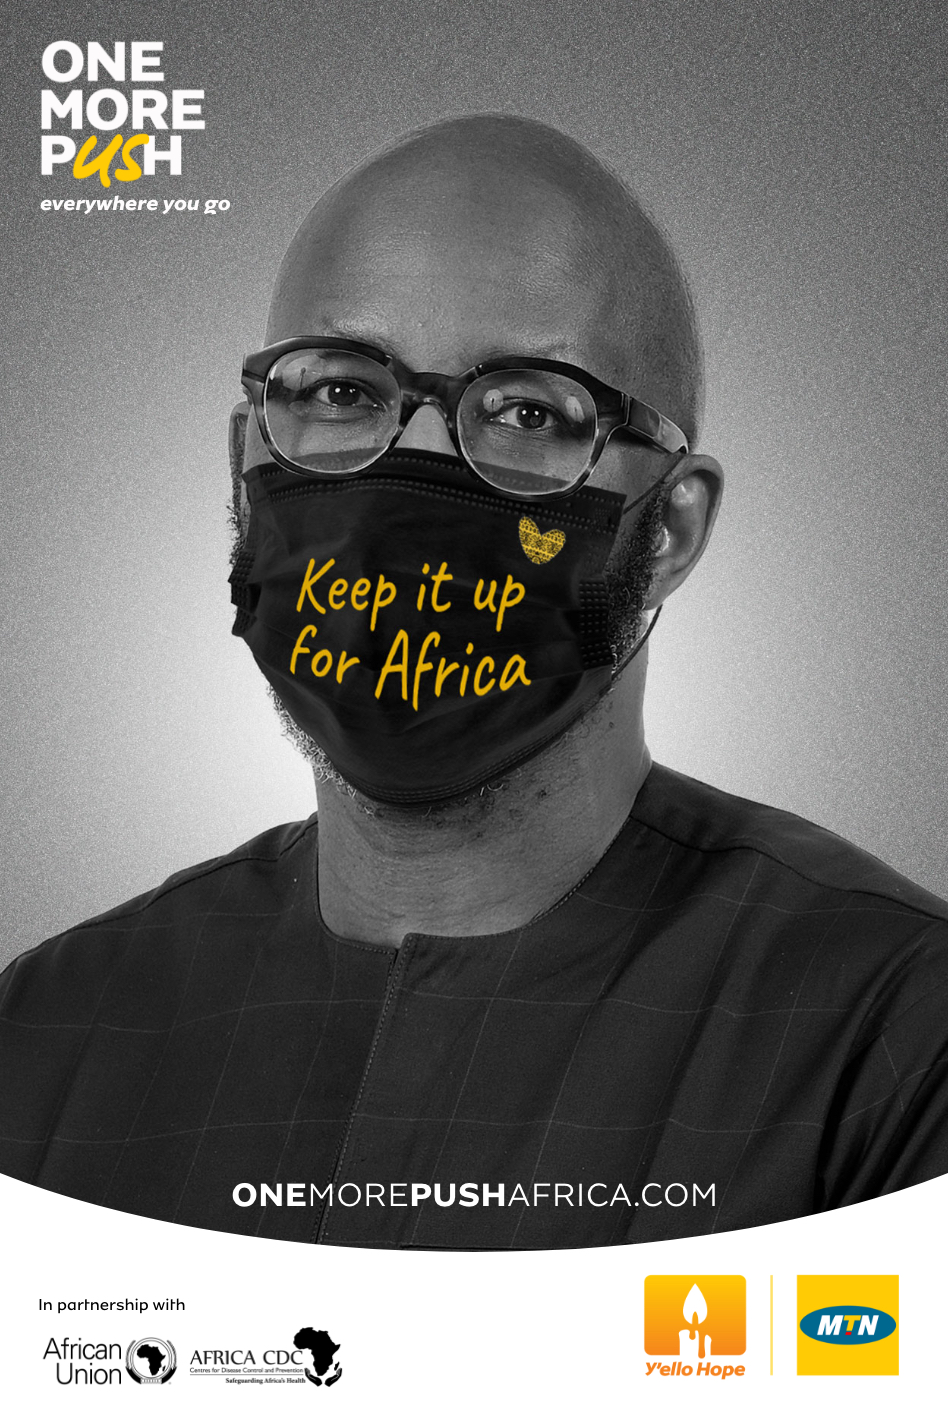 Africa CDC and MTN accelerate fight against COVID-19 with “One More Push” campaign